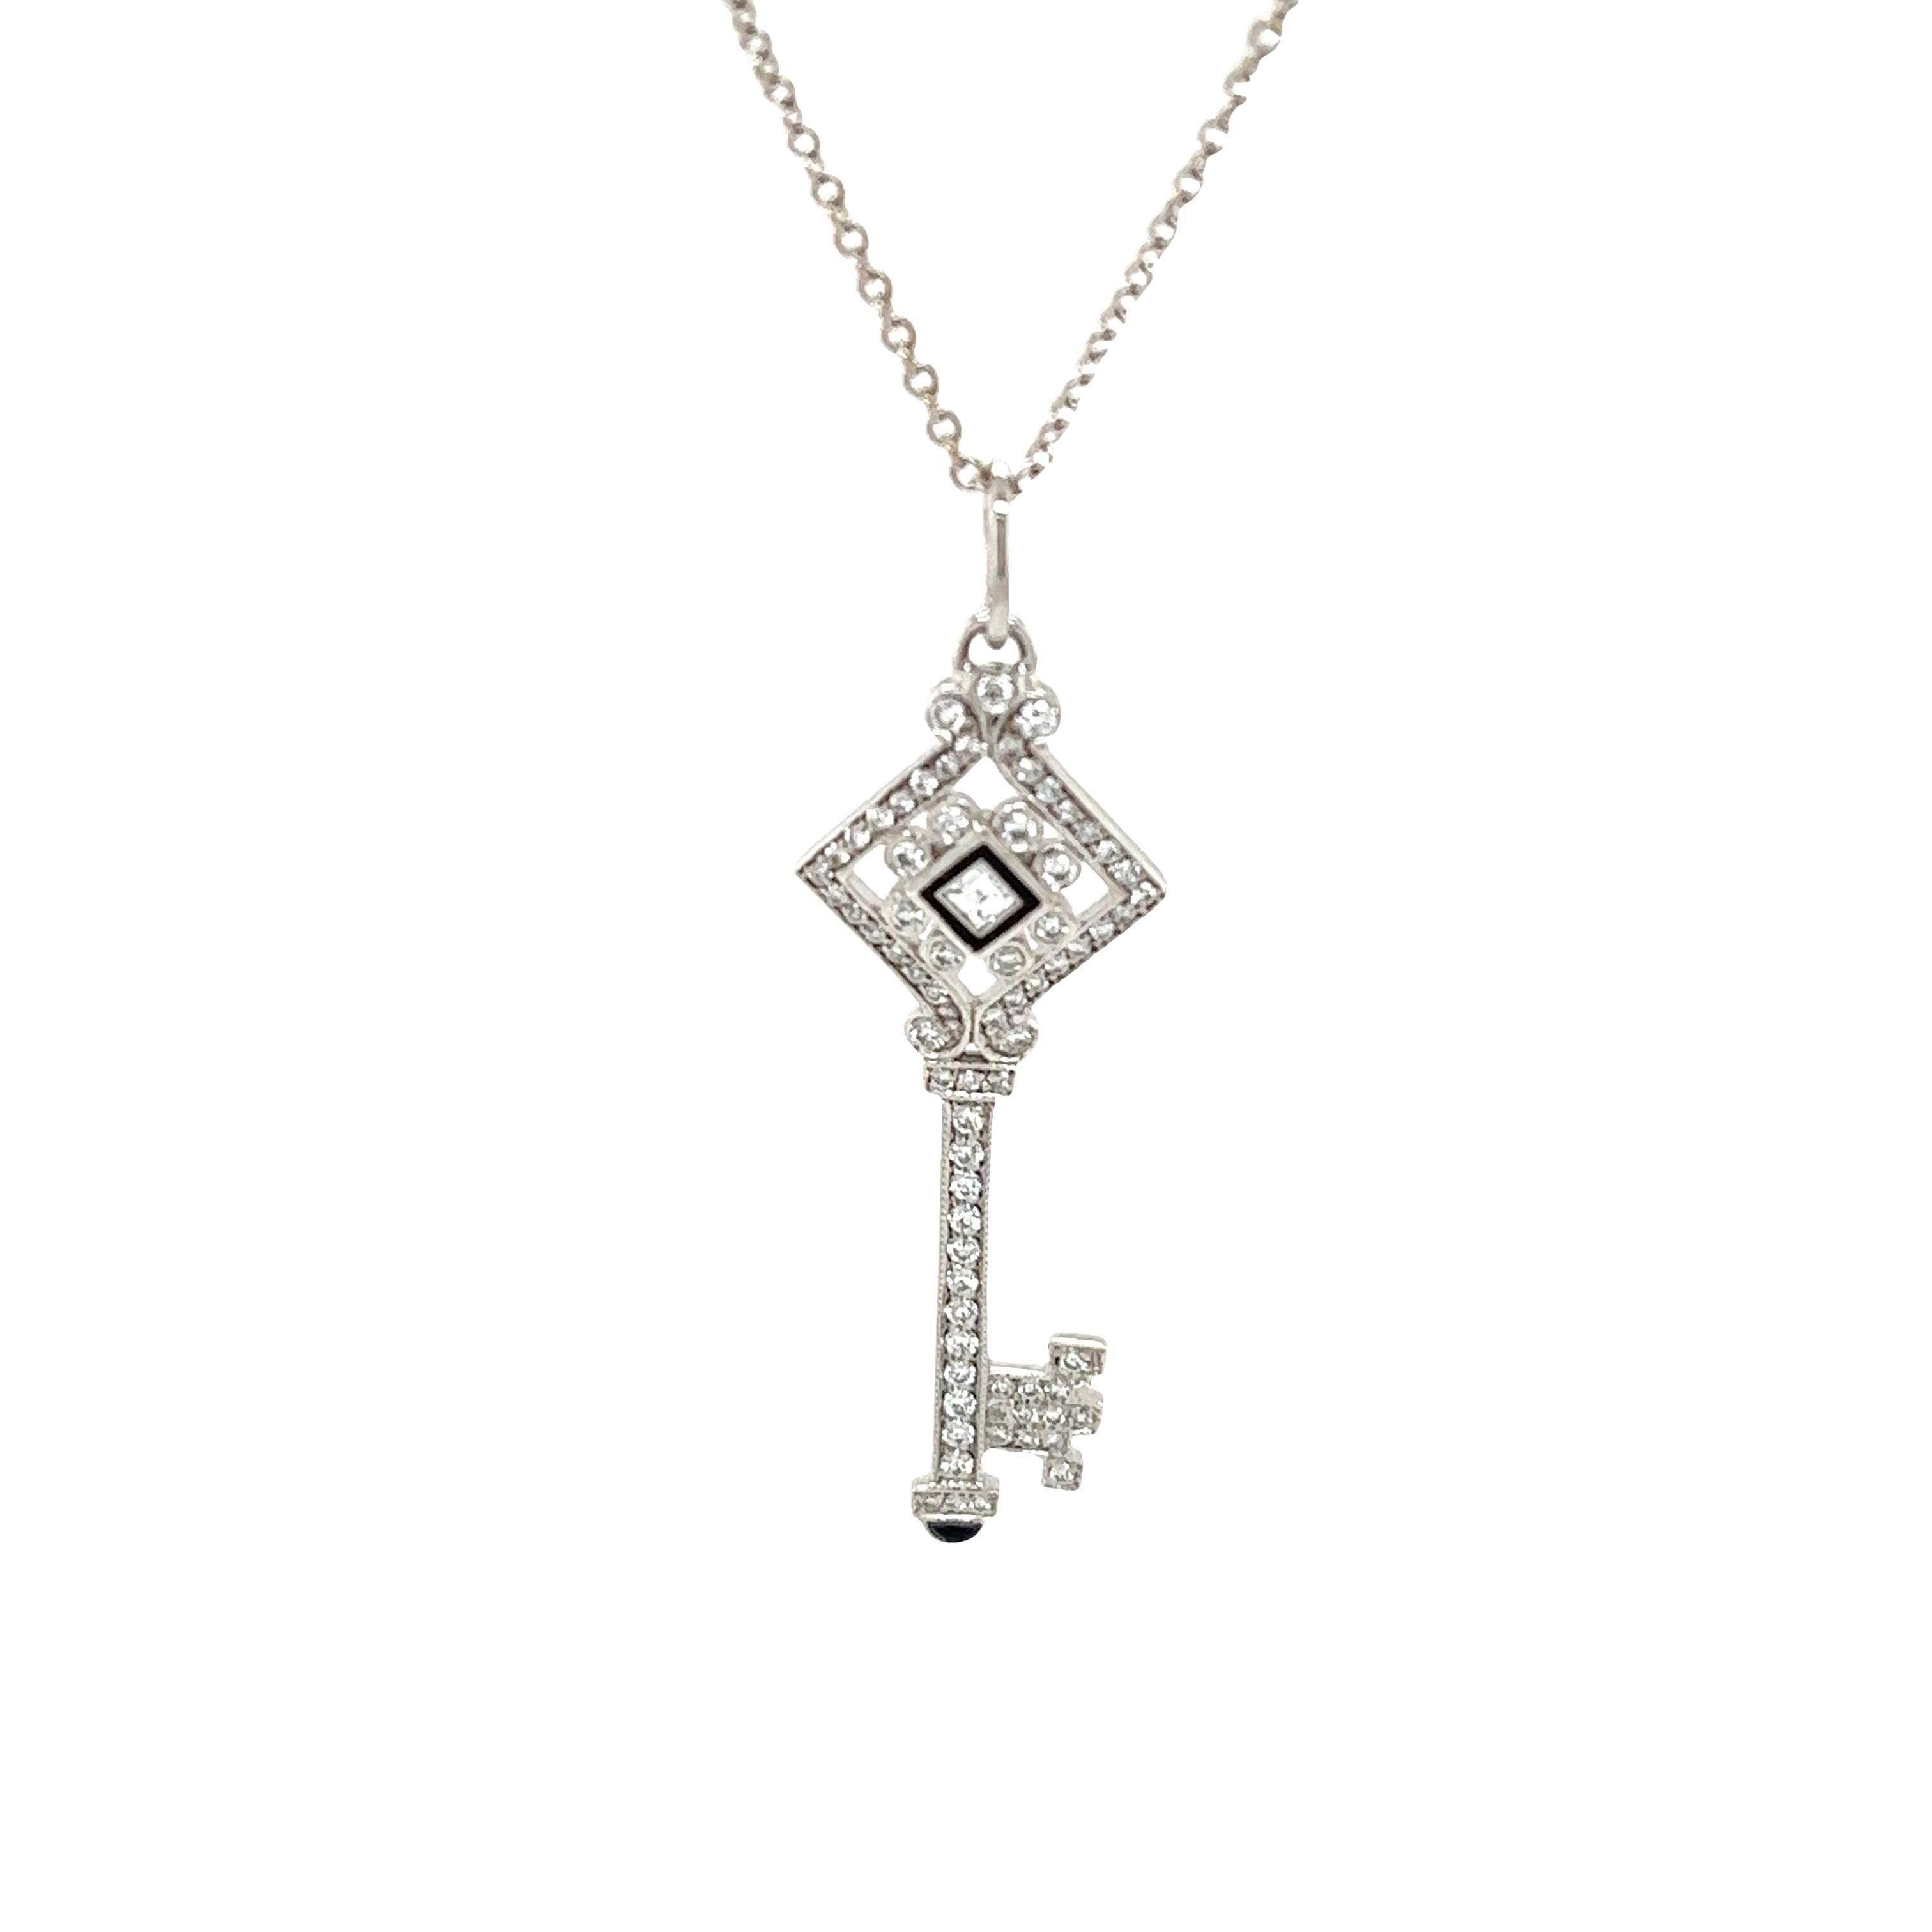 Elevate your style with this exquisite diamond black enamel 18ct white gold key pendant.
Crafted with precision and elegance, this pendant features a stunning design adorned with shimmering diamonds, with a total weight of 0.35ct F/VS brilliant cut